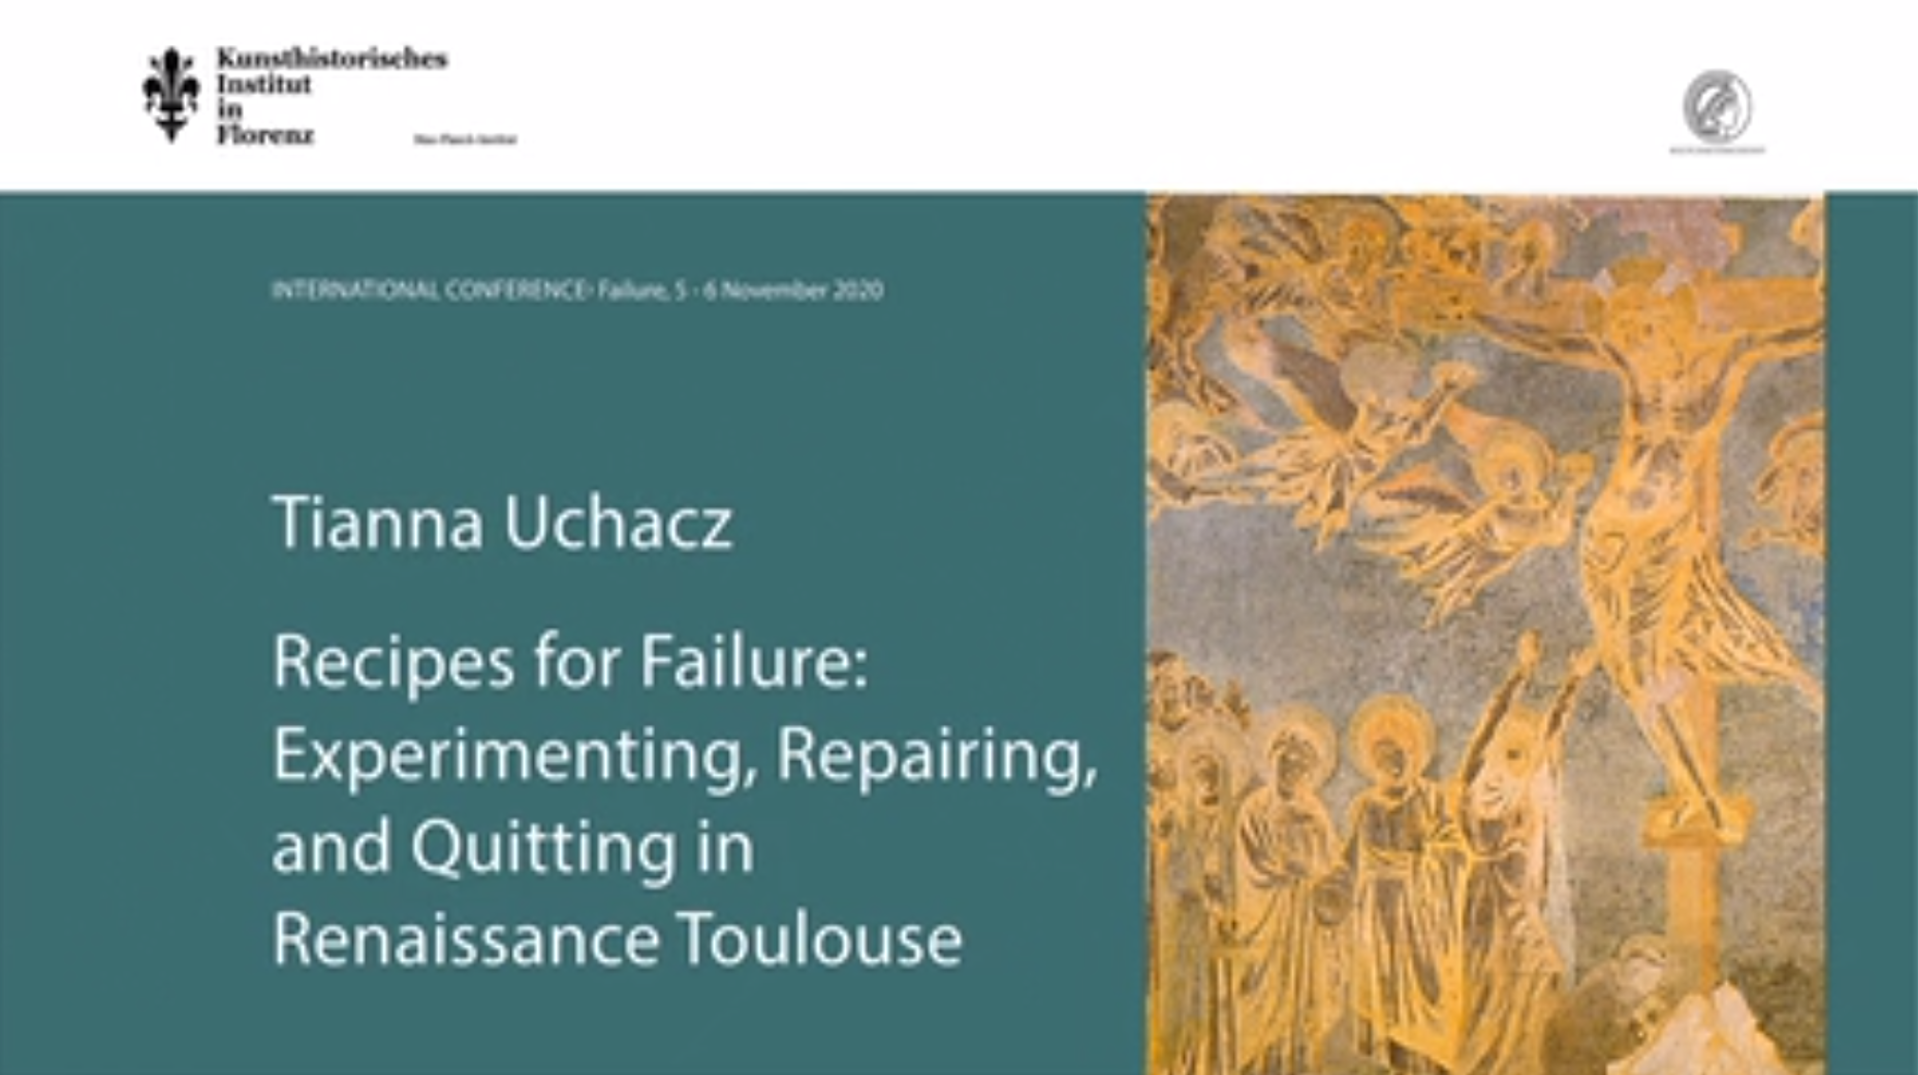 Recipes for Failure: Experimenting, Repairing, and Quitting in Renaissance Toulouse